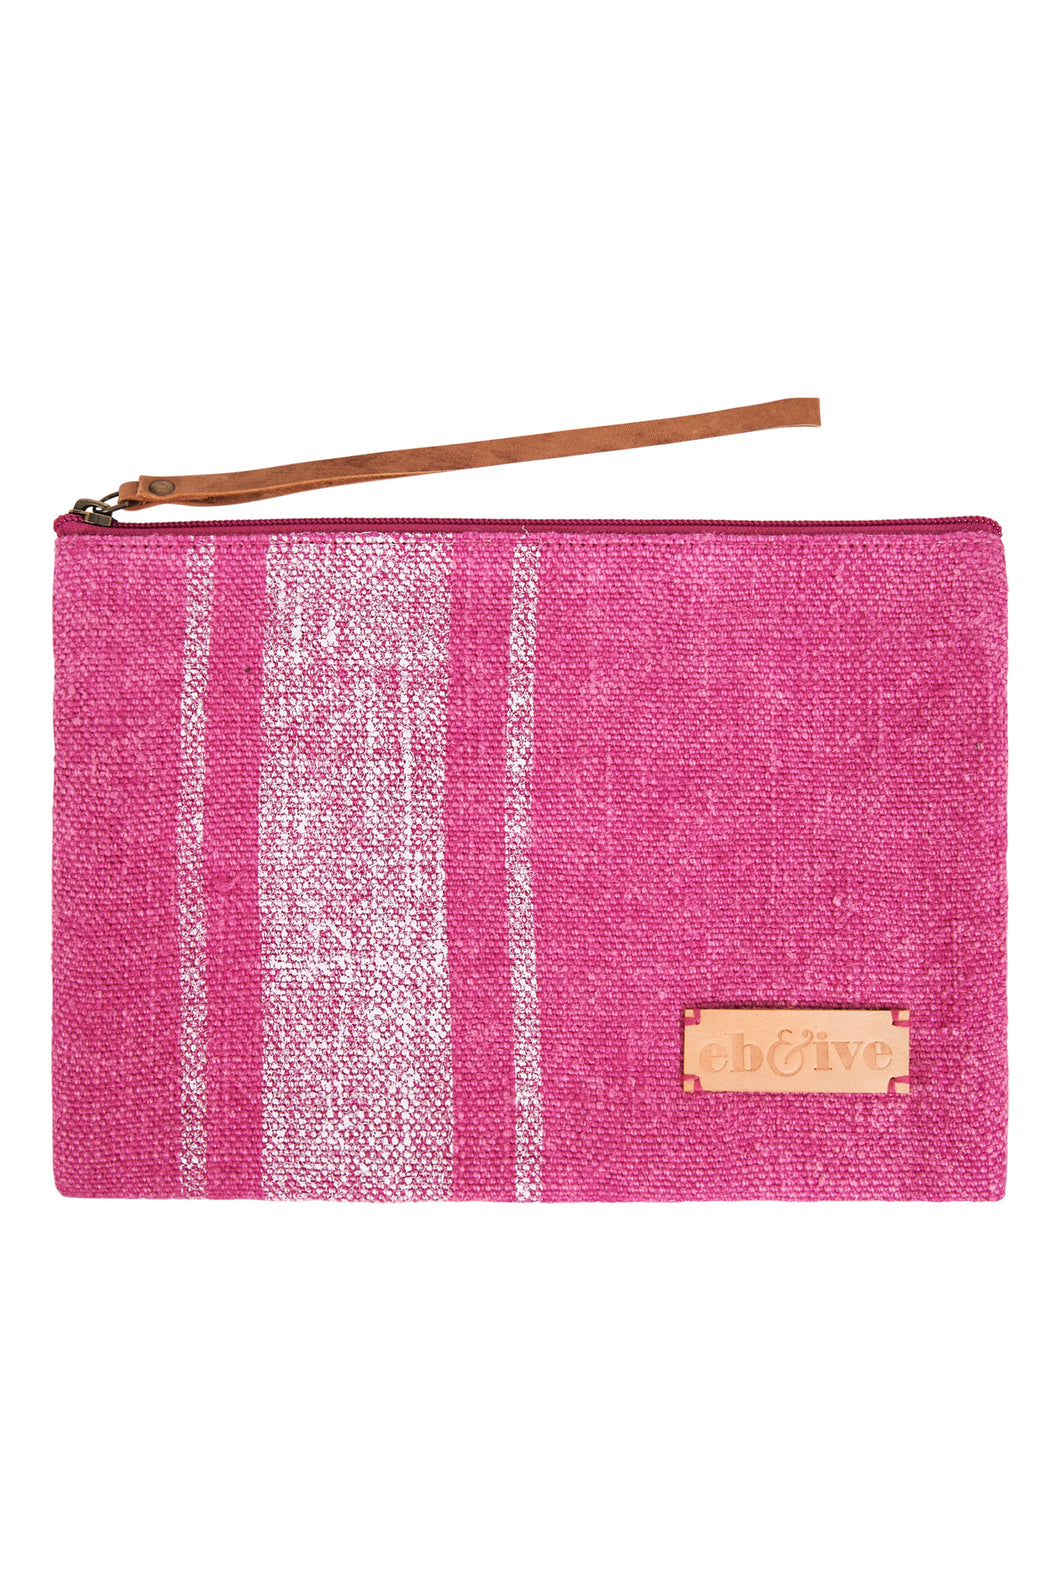 Eb&Ive - La Vie Pouch in Candy